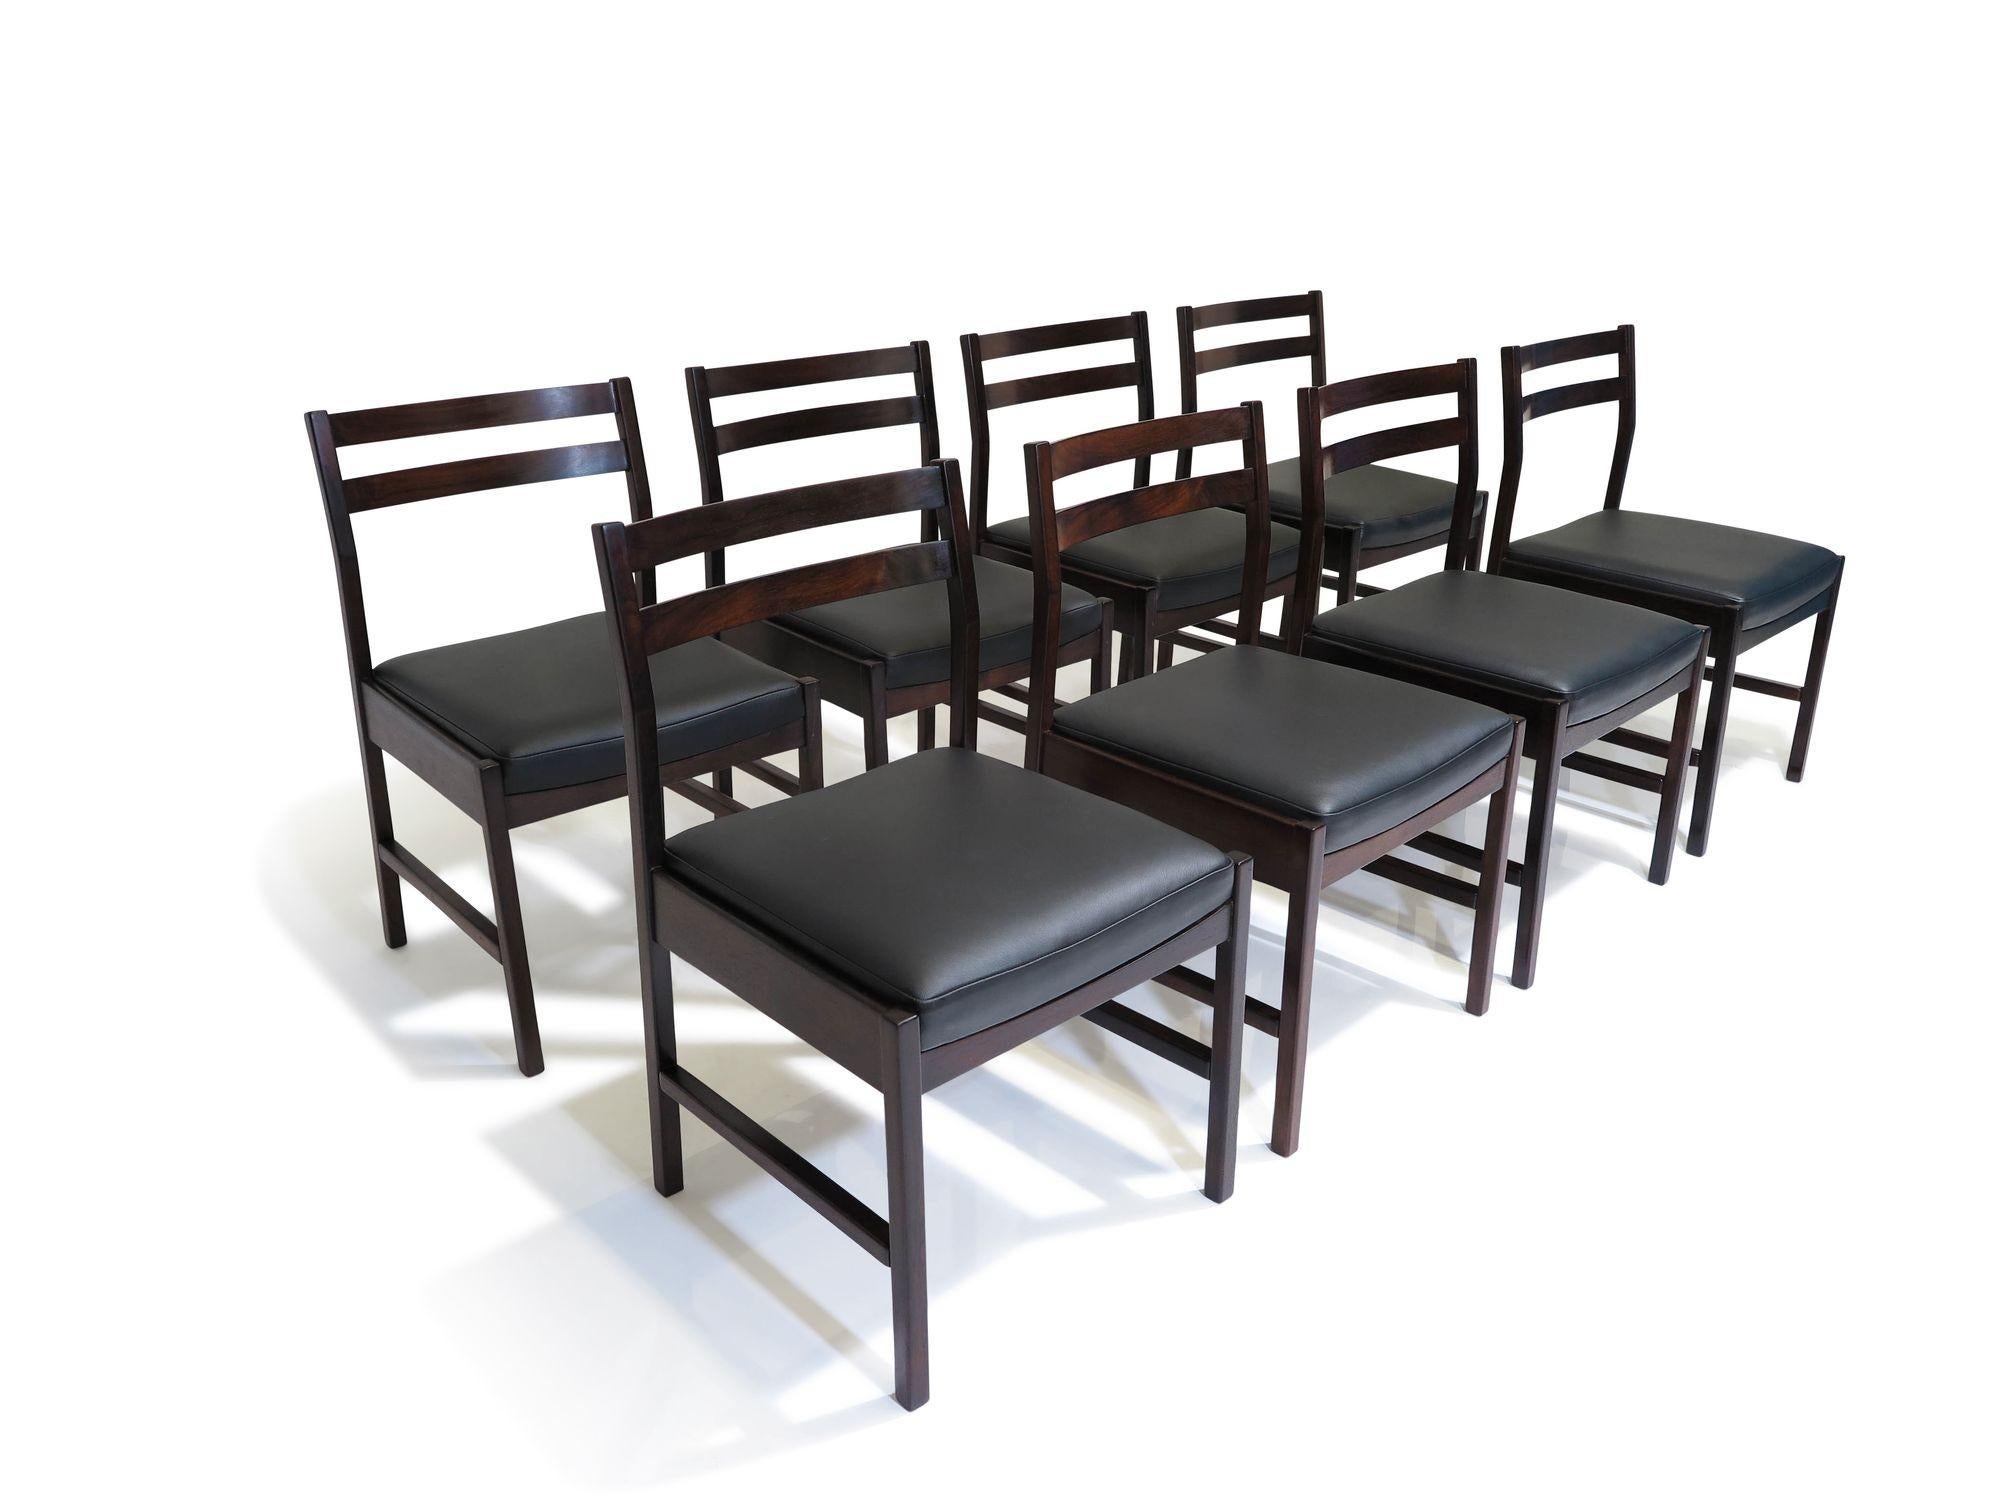 Set of 8 Minimalist Brazilian rosewood dining chairs designed by Vittorio Tassini for Moveis Decoraçoes Tássini, Brazil, 1955. These chairs showcase solid Brazilian rosewood construction with a ladder back design featuring two slats, complemented by